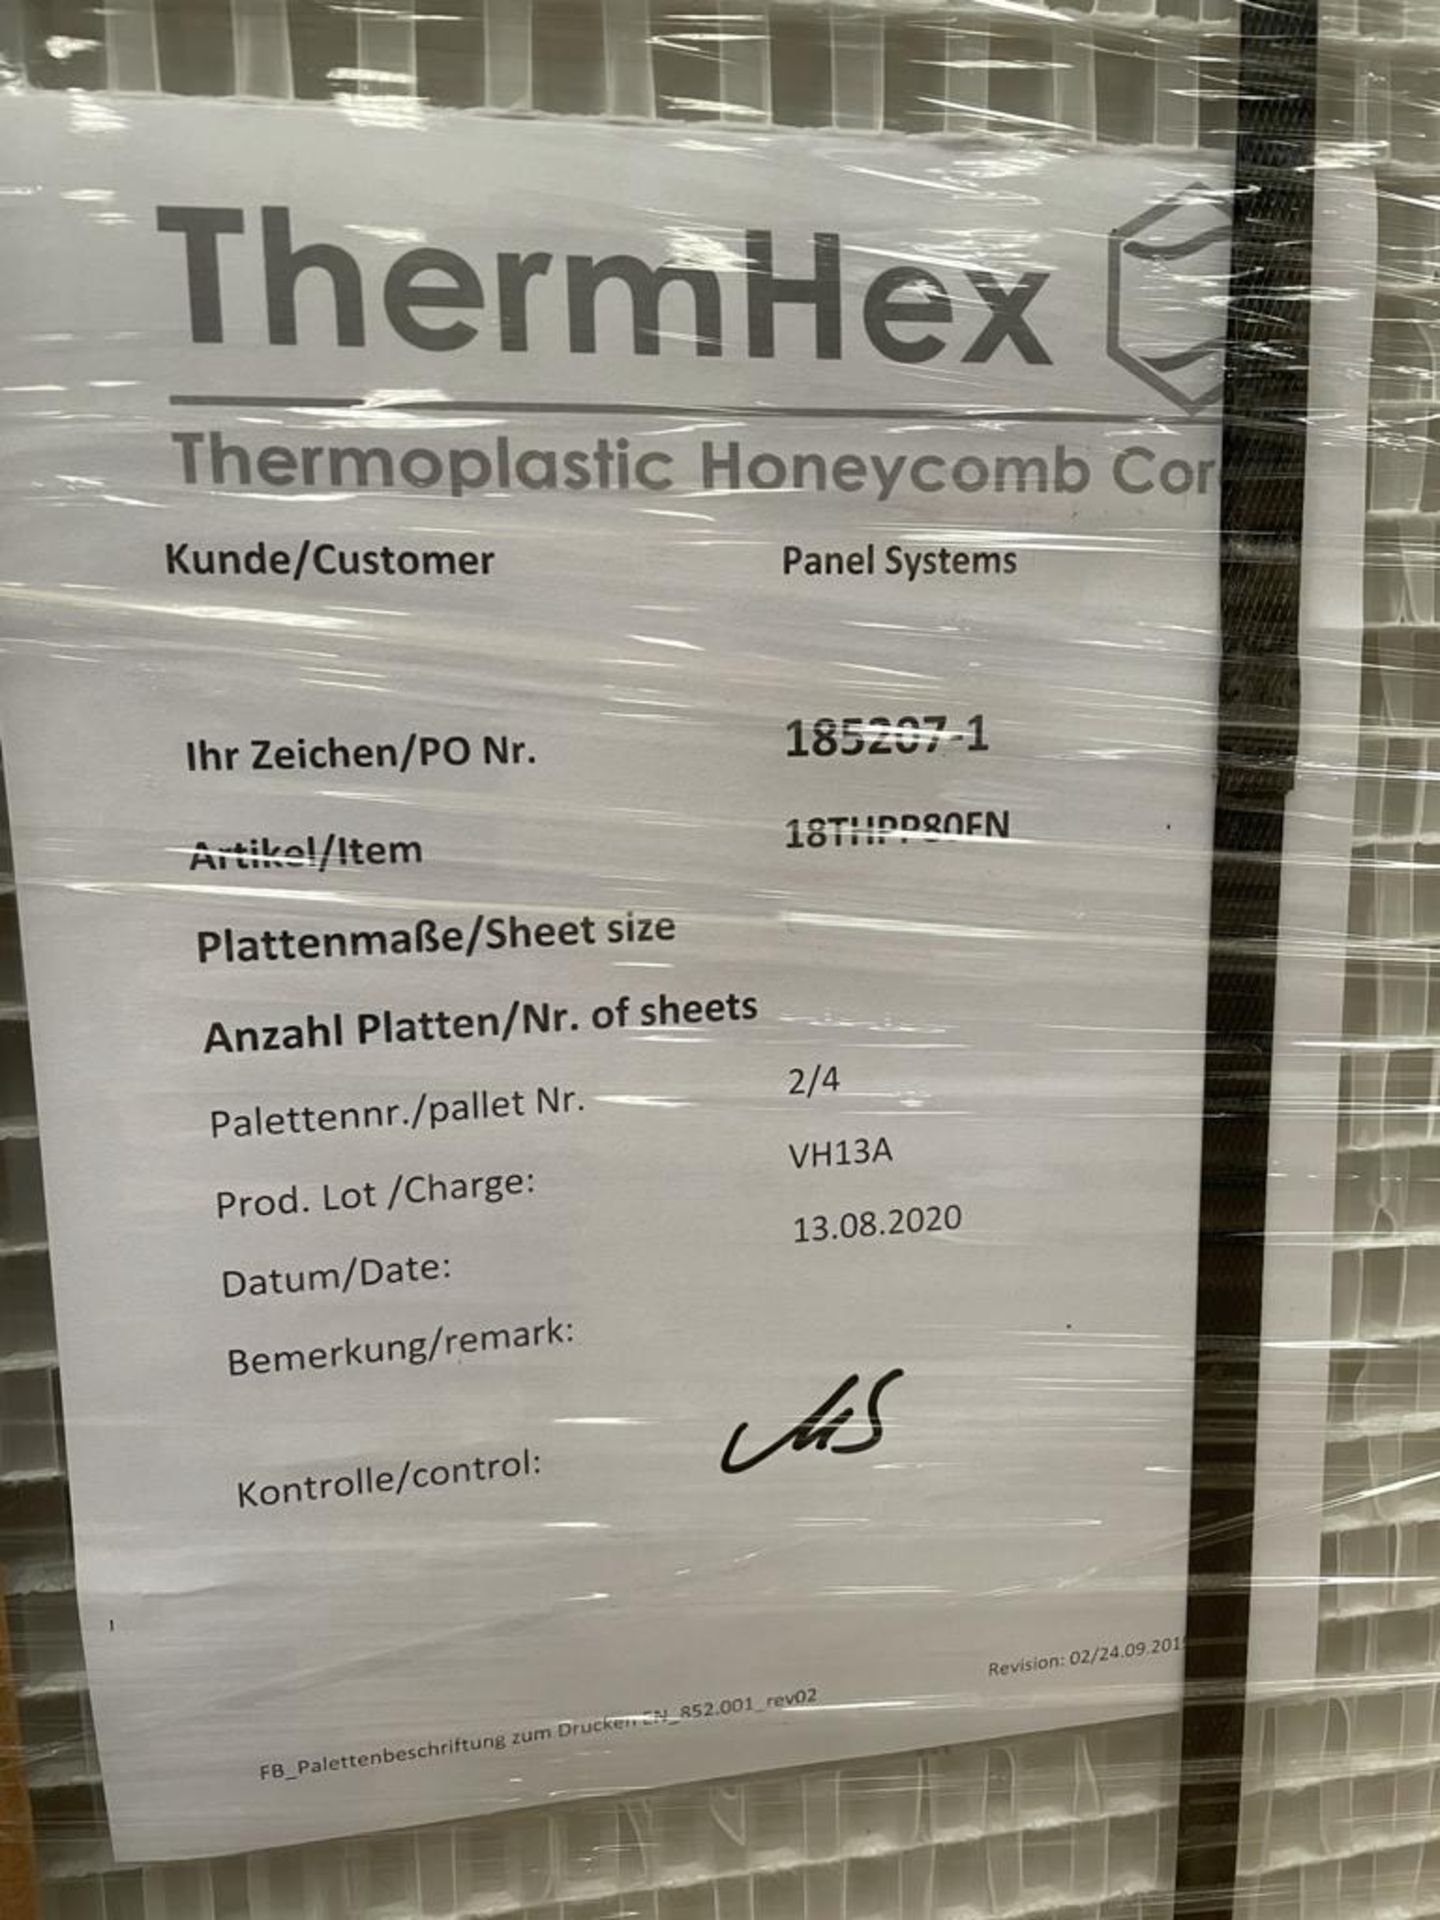 24 x ThermHex Thermoplastic Honeycomb Core Panels - Size 693 x 1210 x 18mm - New Stock - Lightweight - Image 8 of 8